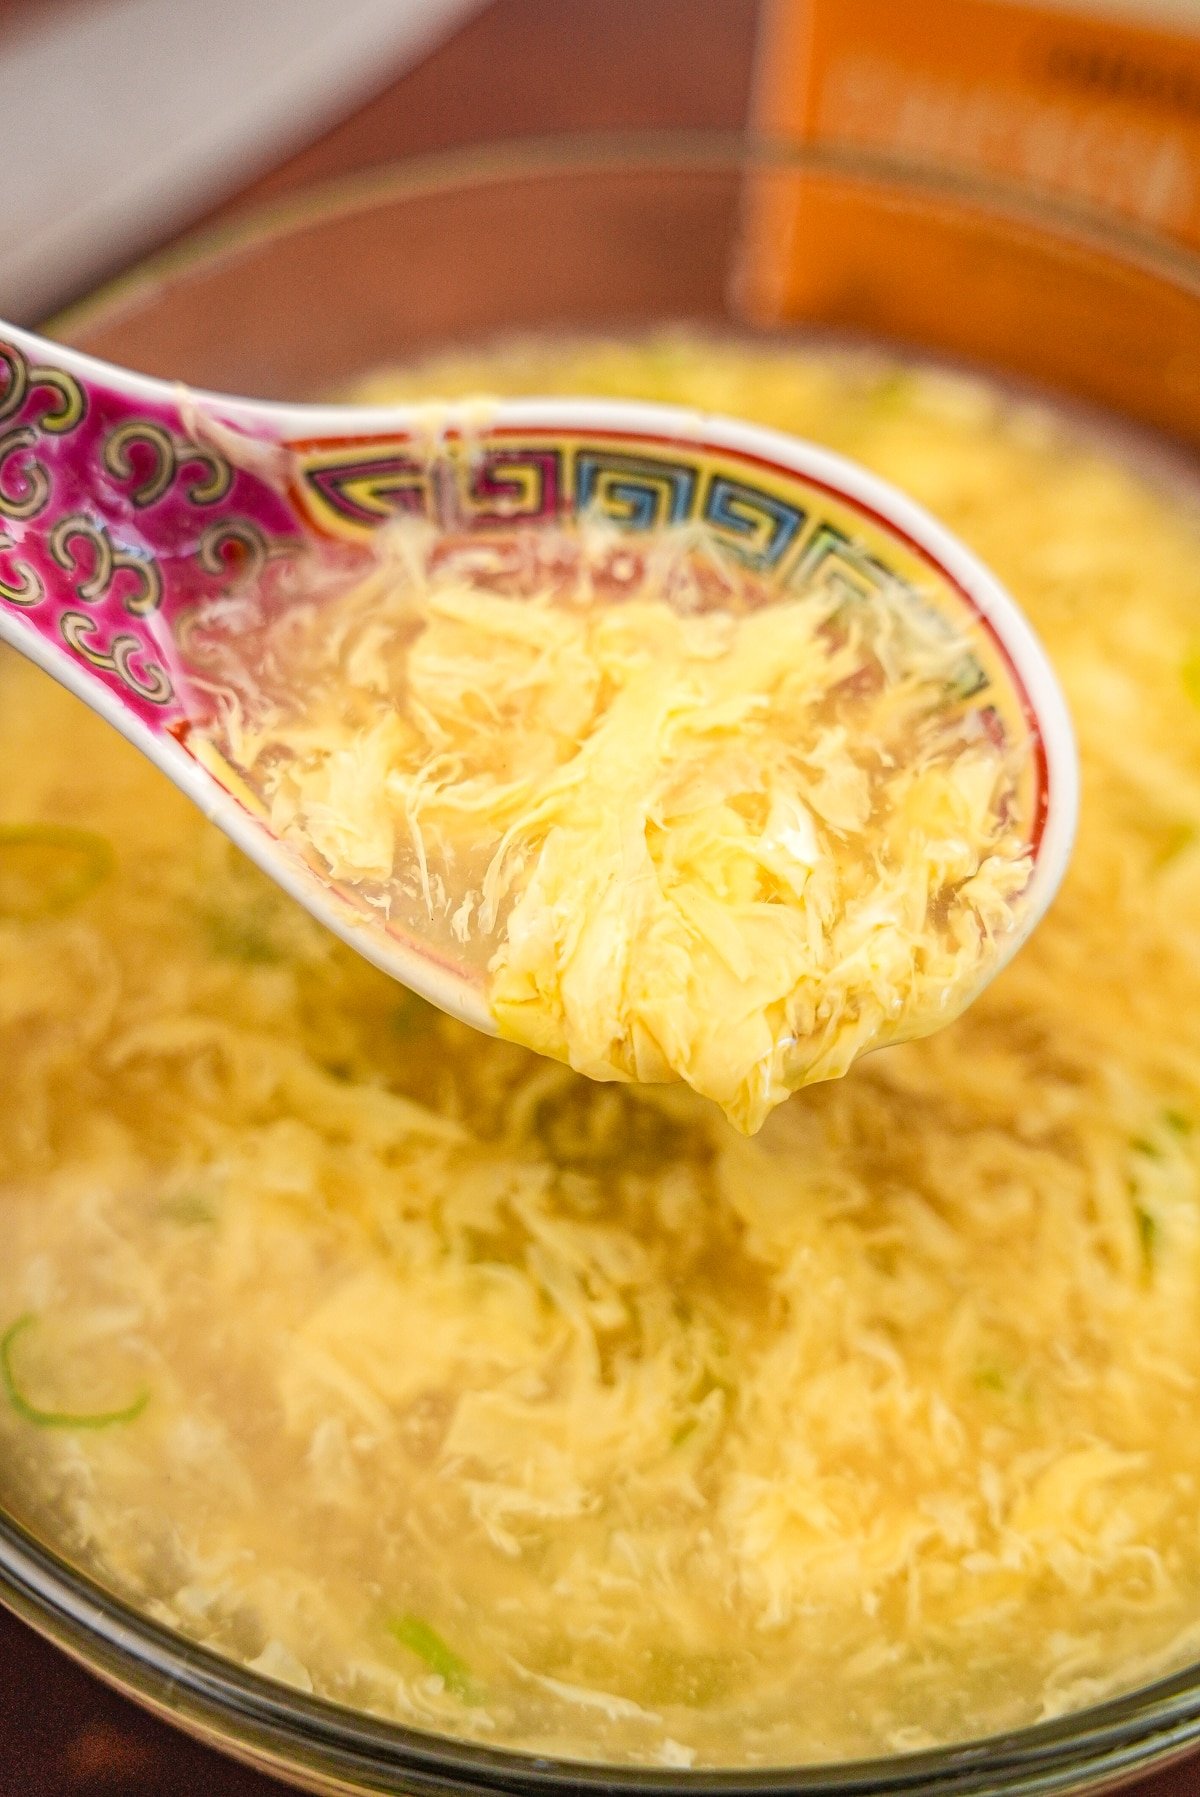 Egg drop soup in a spoon over a glass bowl of soup.